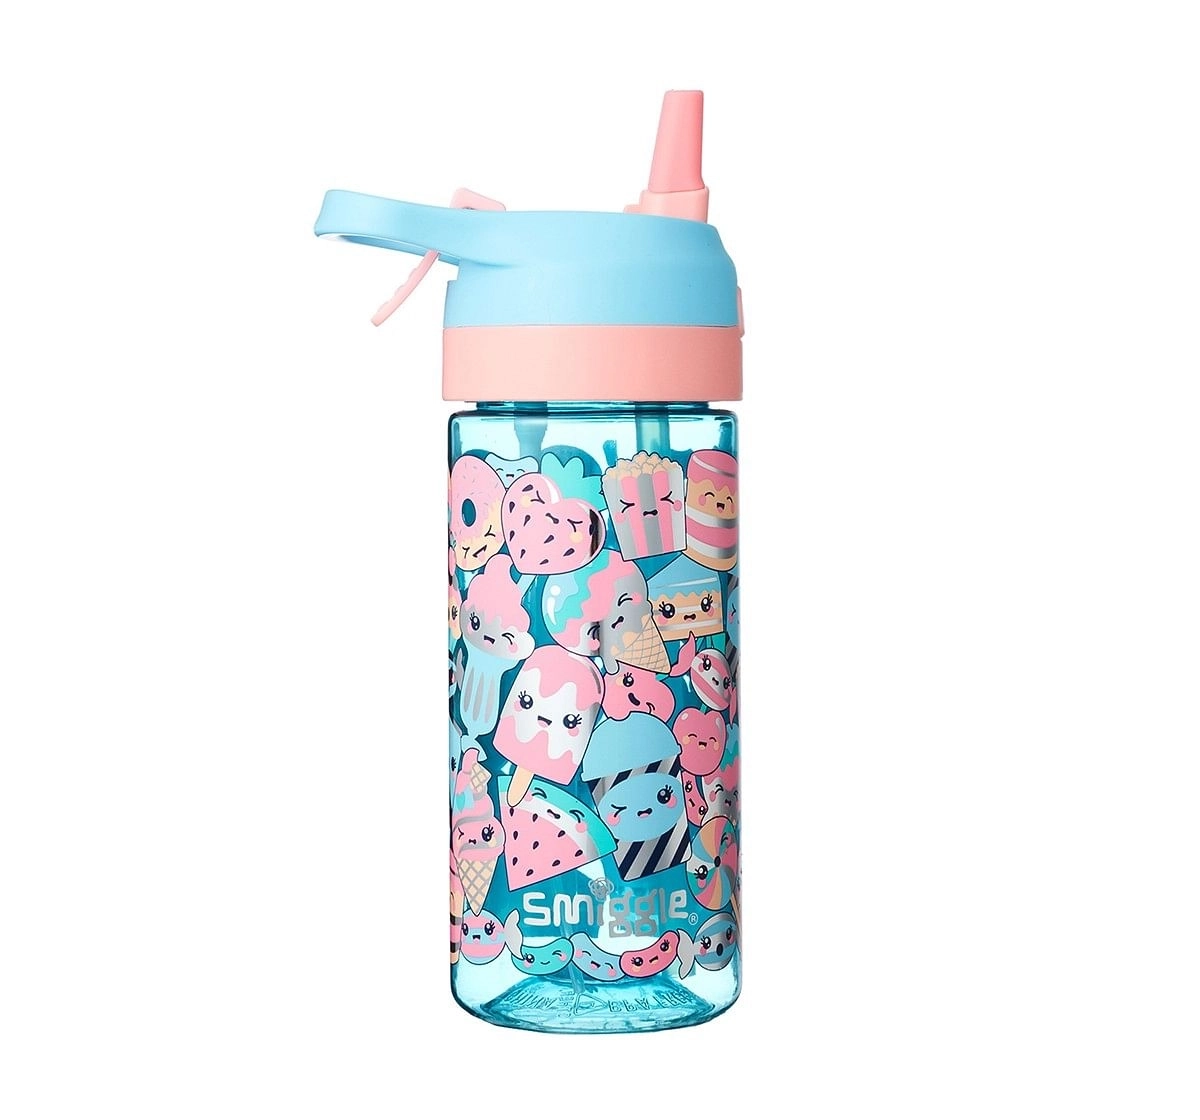 Smiggle Zip Junior Bottle with Misting Function - Ice-cream Print Bags for Kids age 3Y+ (Blue)